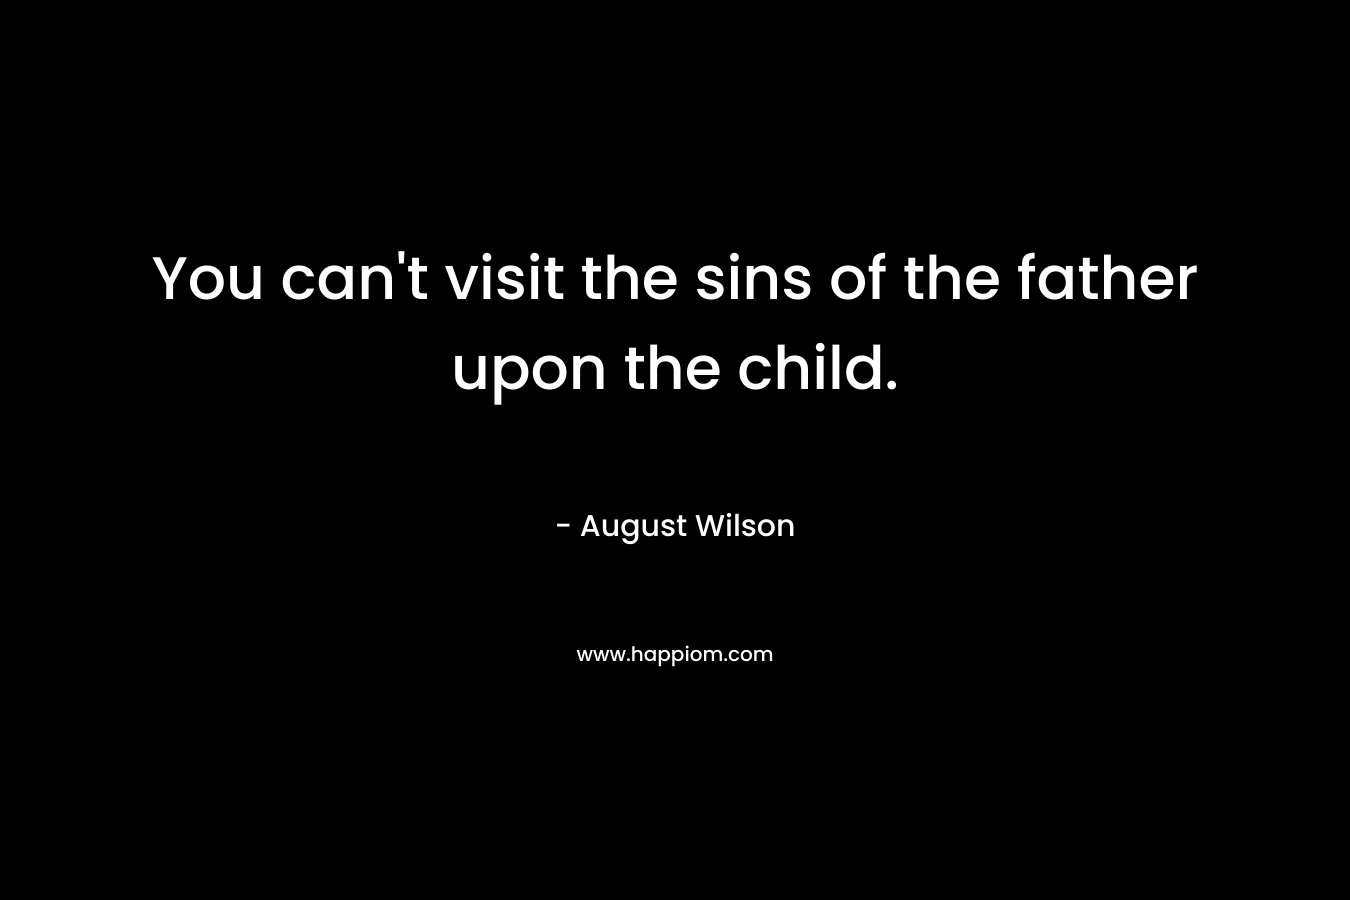 You can't visit the sins of the father upon the child.